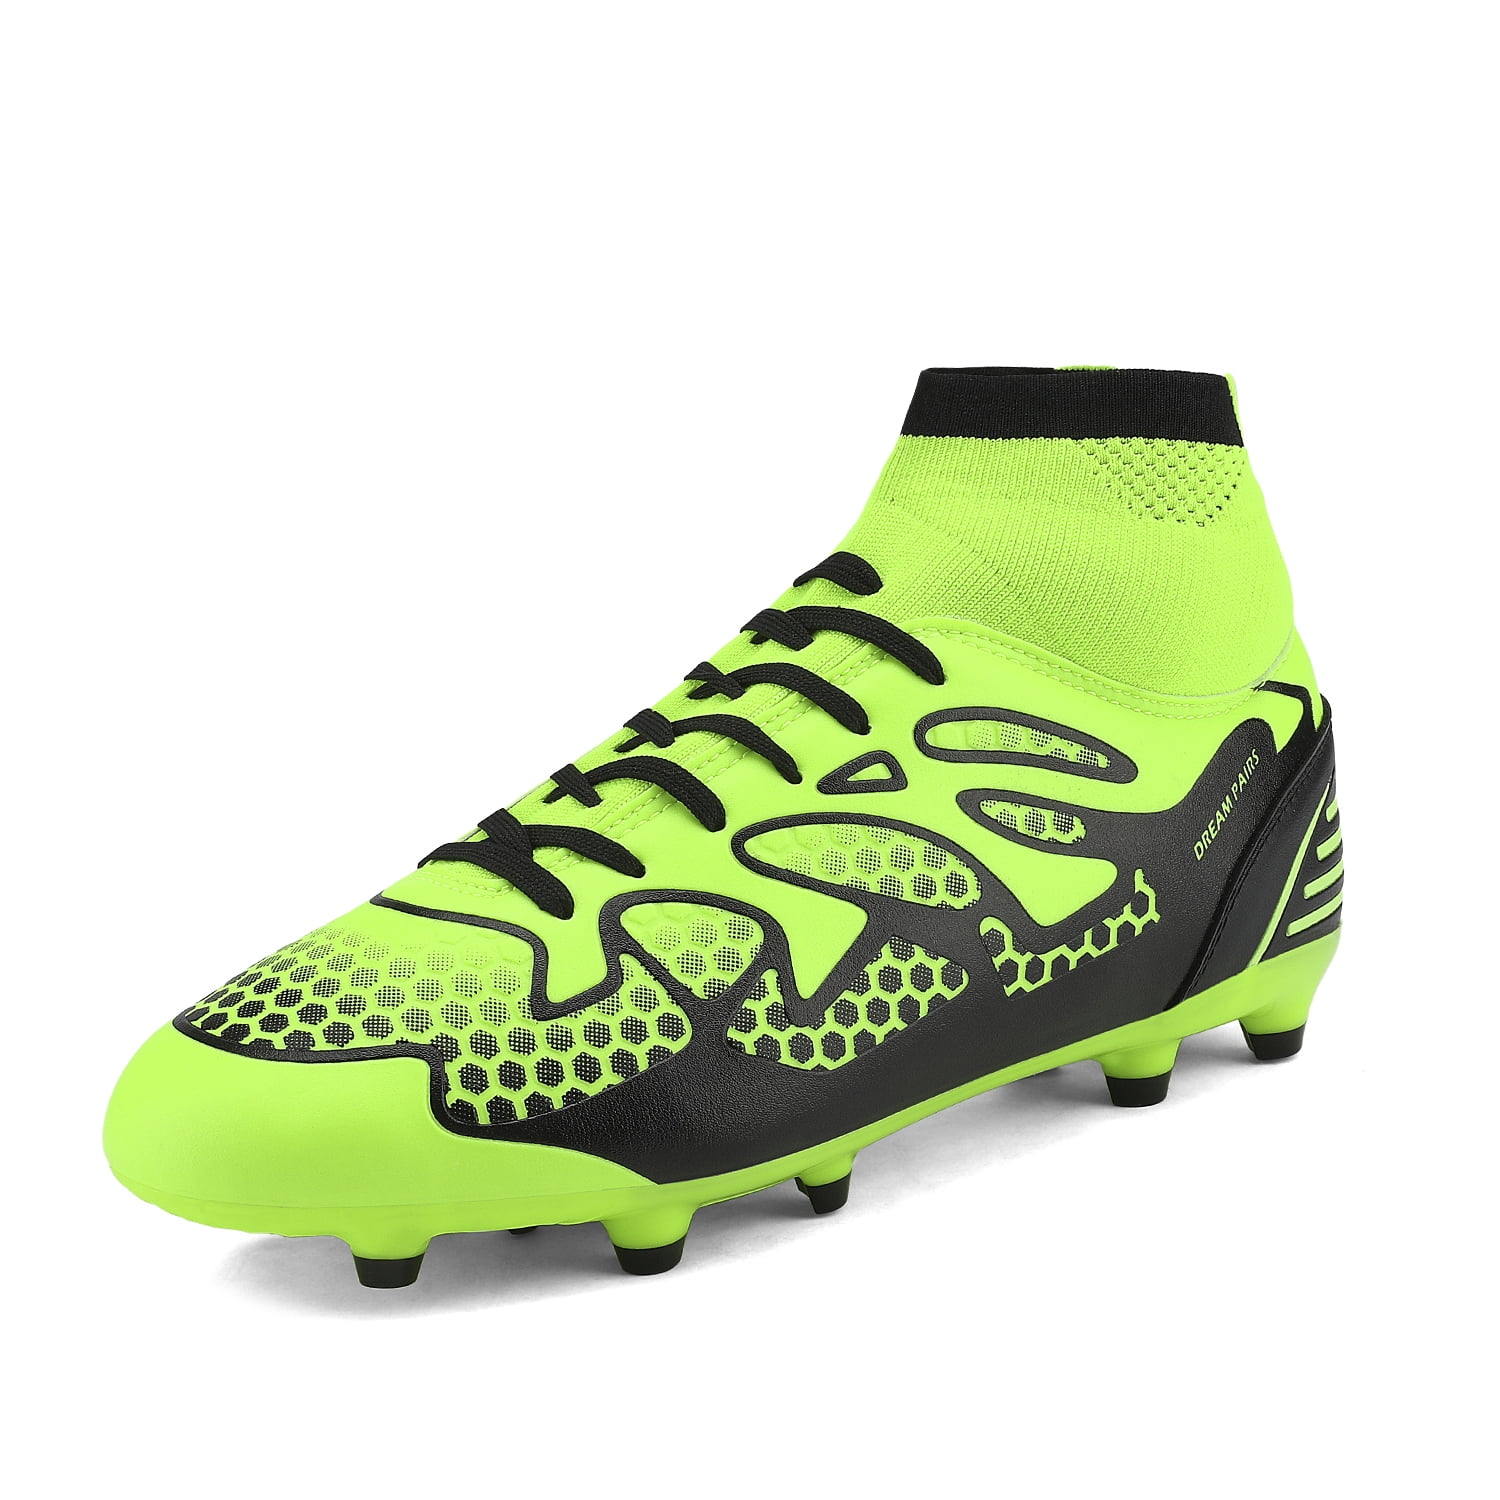 Dream Paris Soccer Shoes Football Sports Cleats Size 10 Toddler Neon/Green/Black 